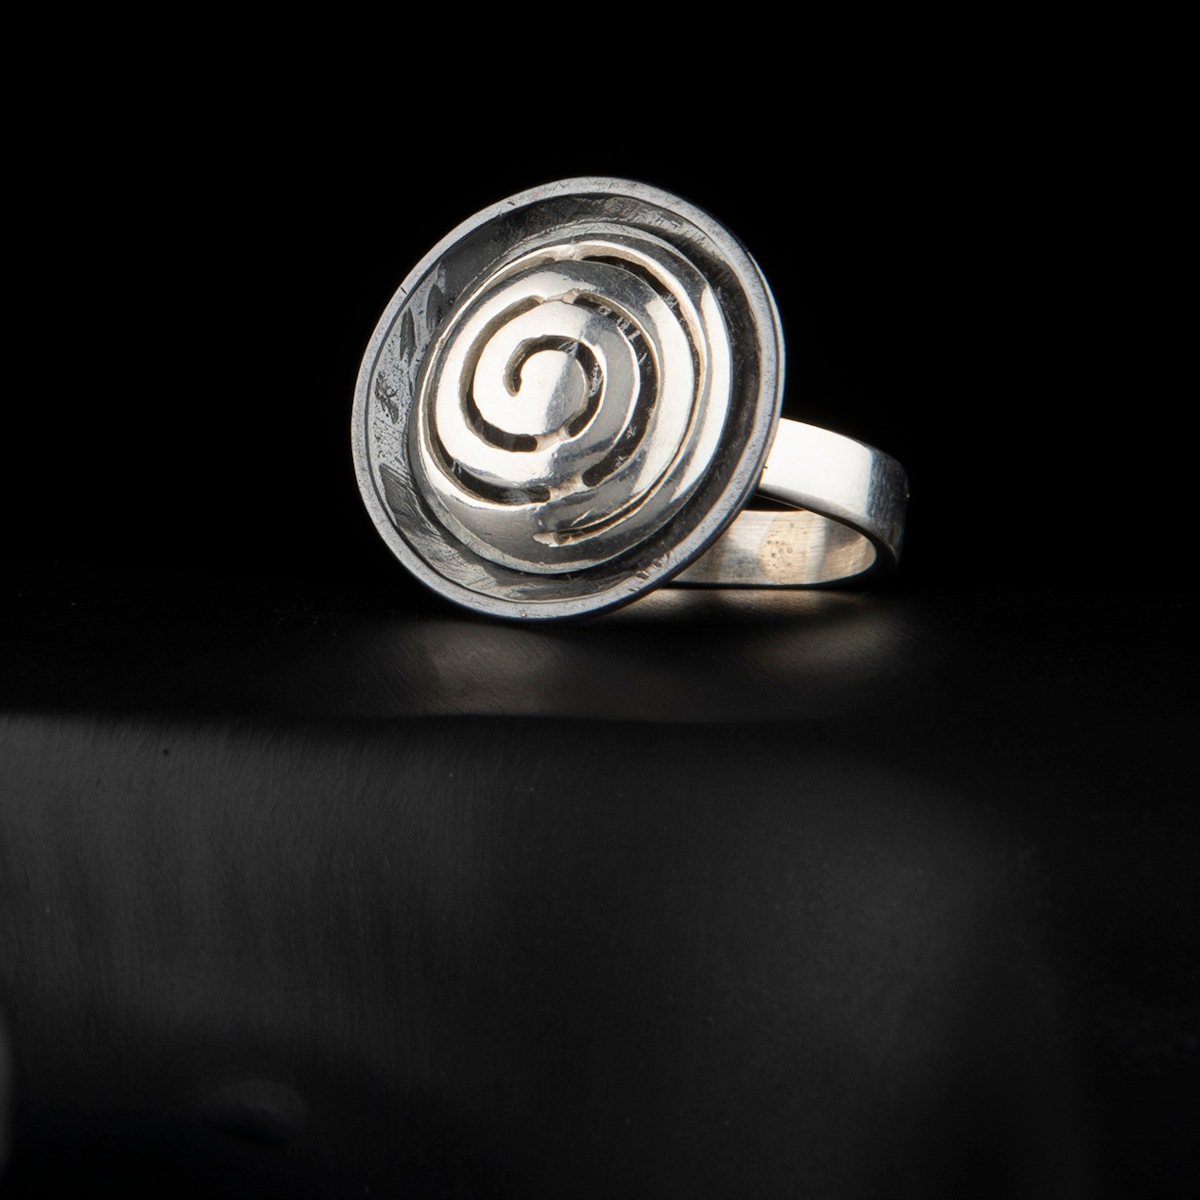 Sterling Silver Triple Spiral Ring - As Seen On TV CW's 